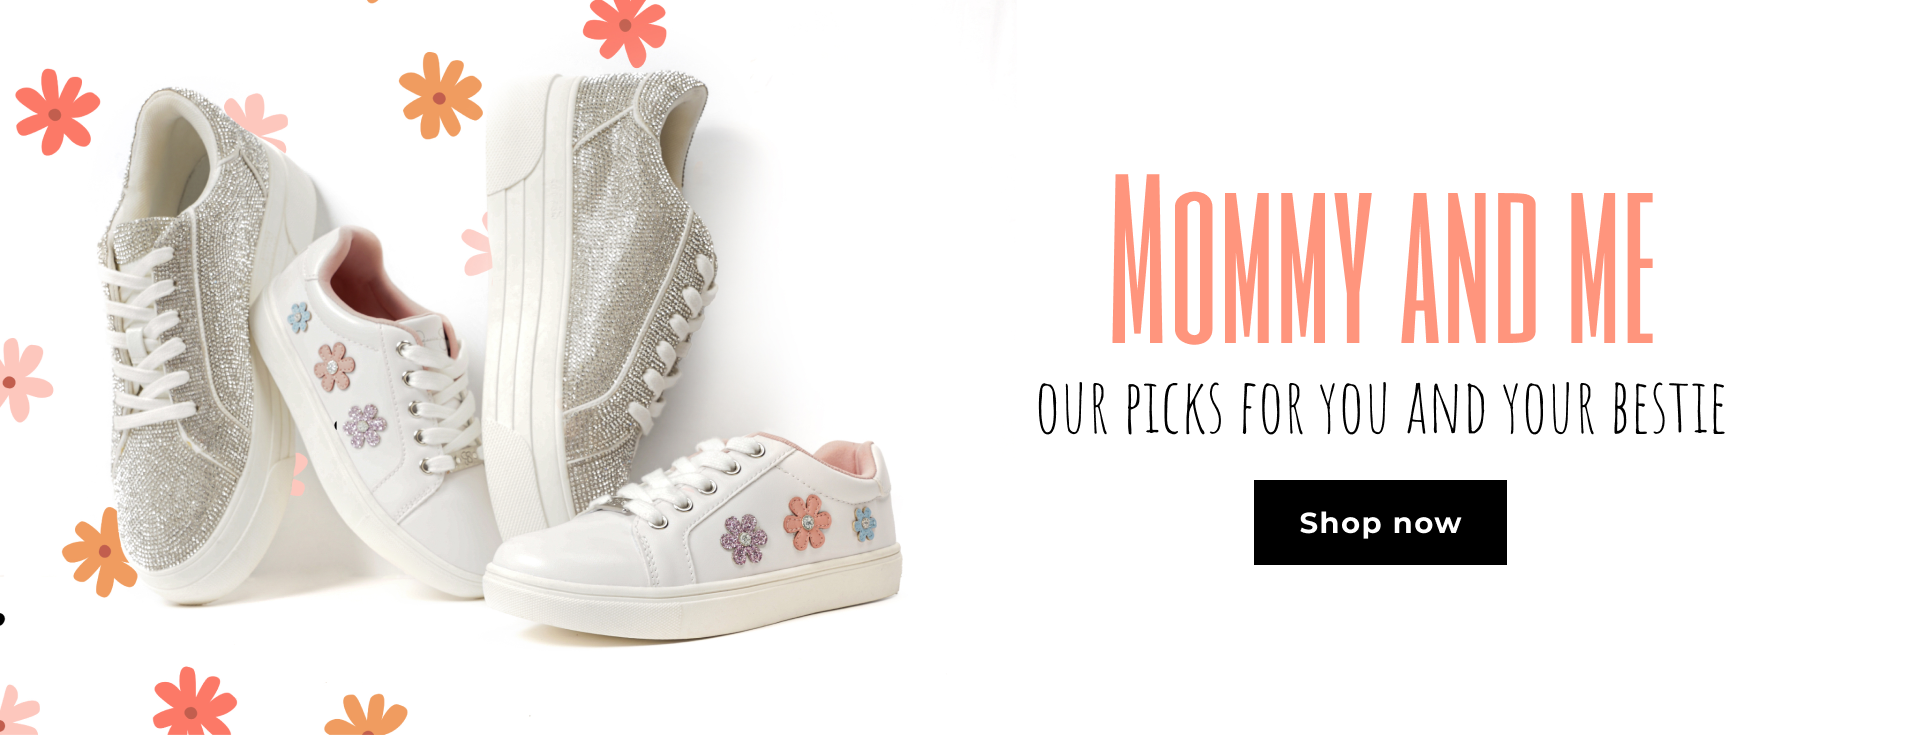 Mommy And Me. Our Picks for You and Your Bestie Shop Now